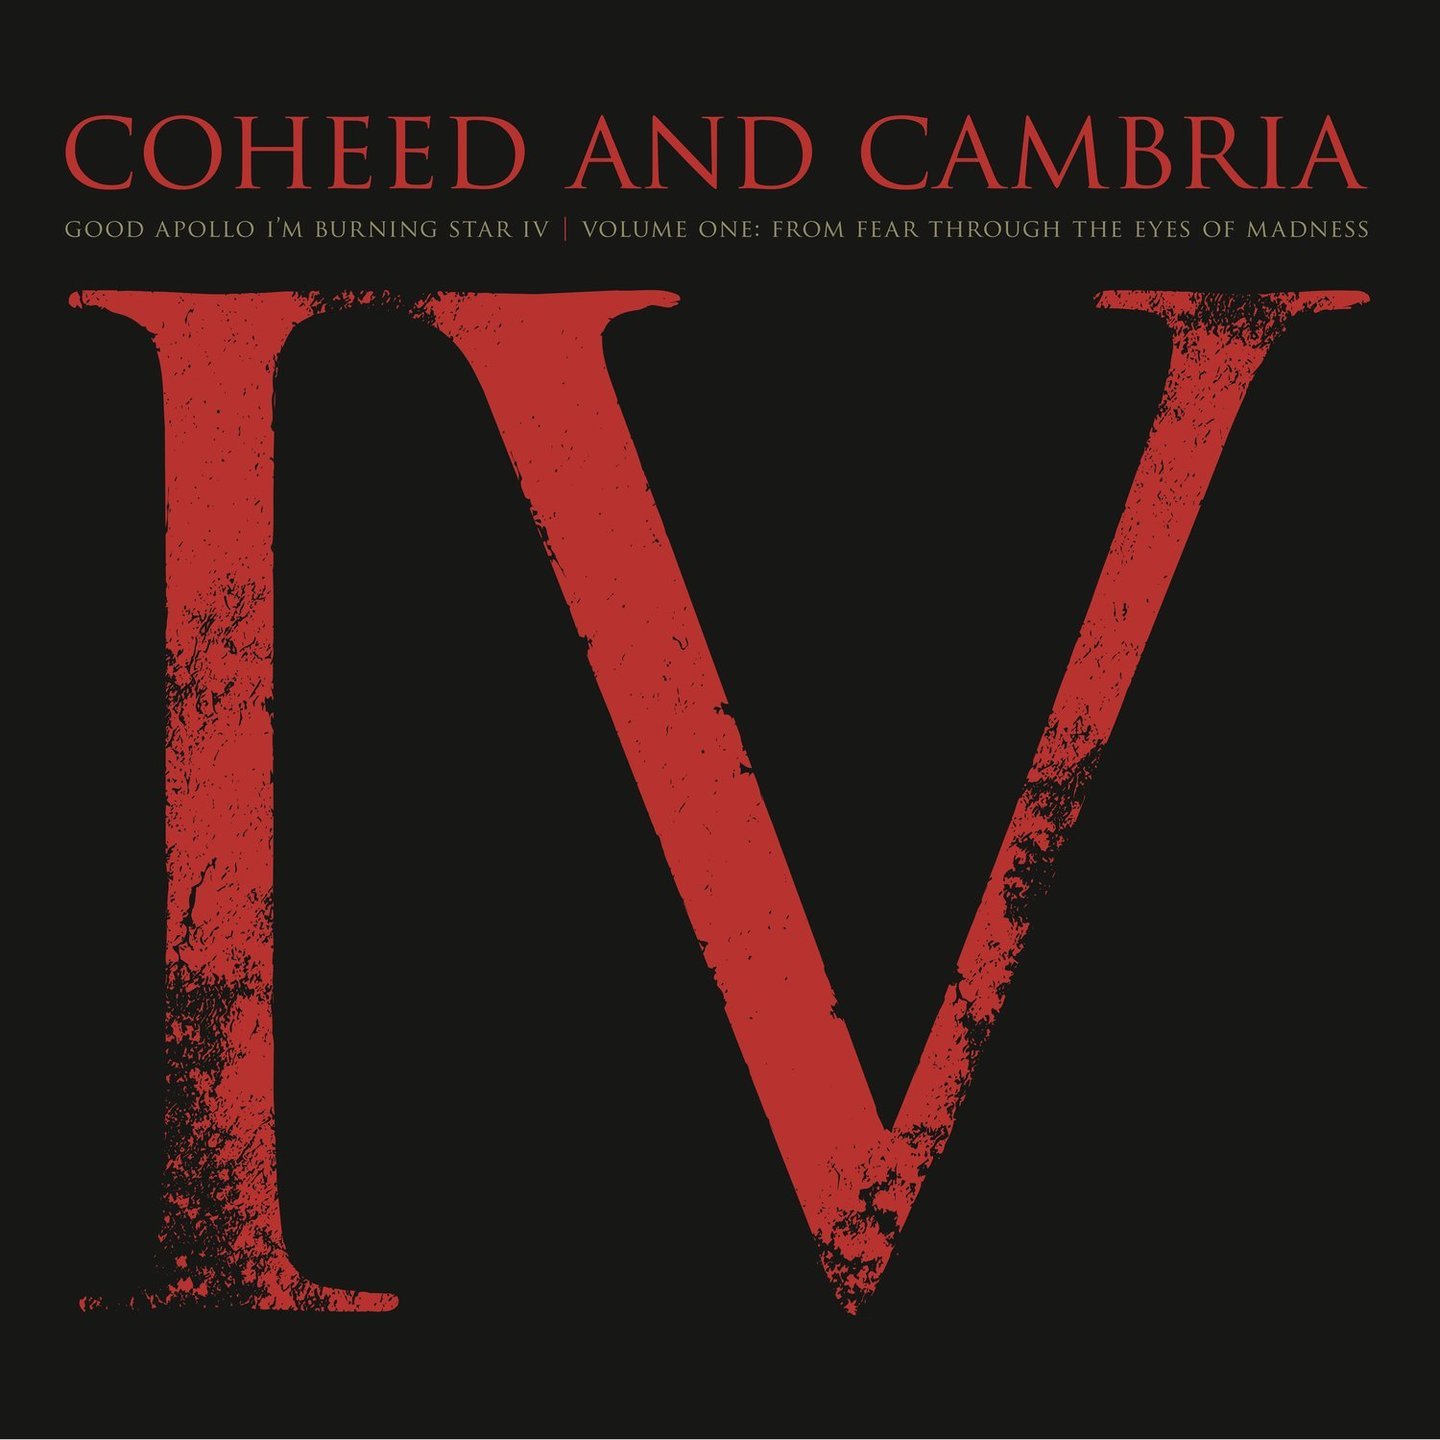 COHEED & CAMBRIA - Good Apollo Im Burning Star IV Volume One From Fear Through The Eyes Of Madness 2xLP